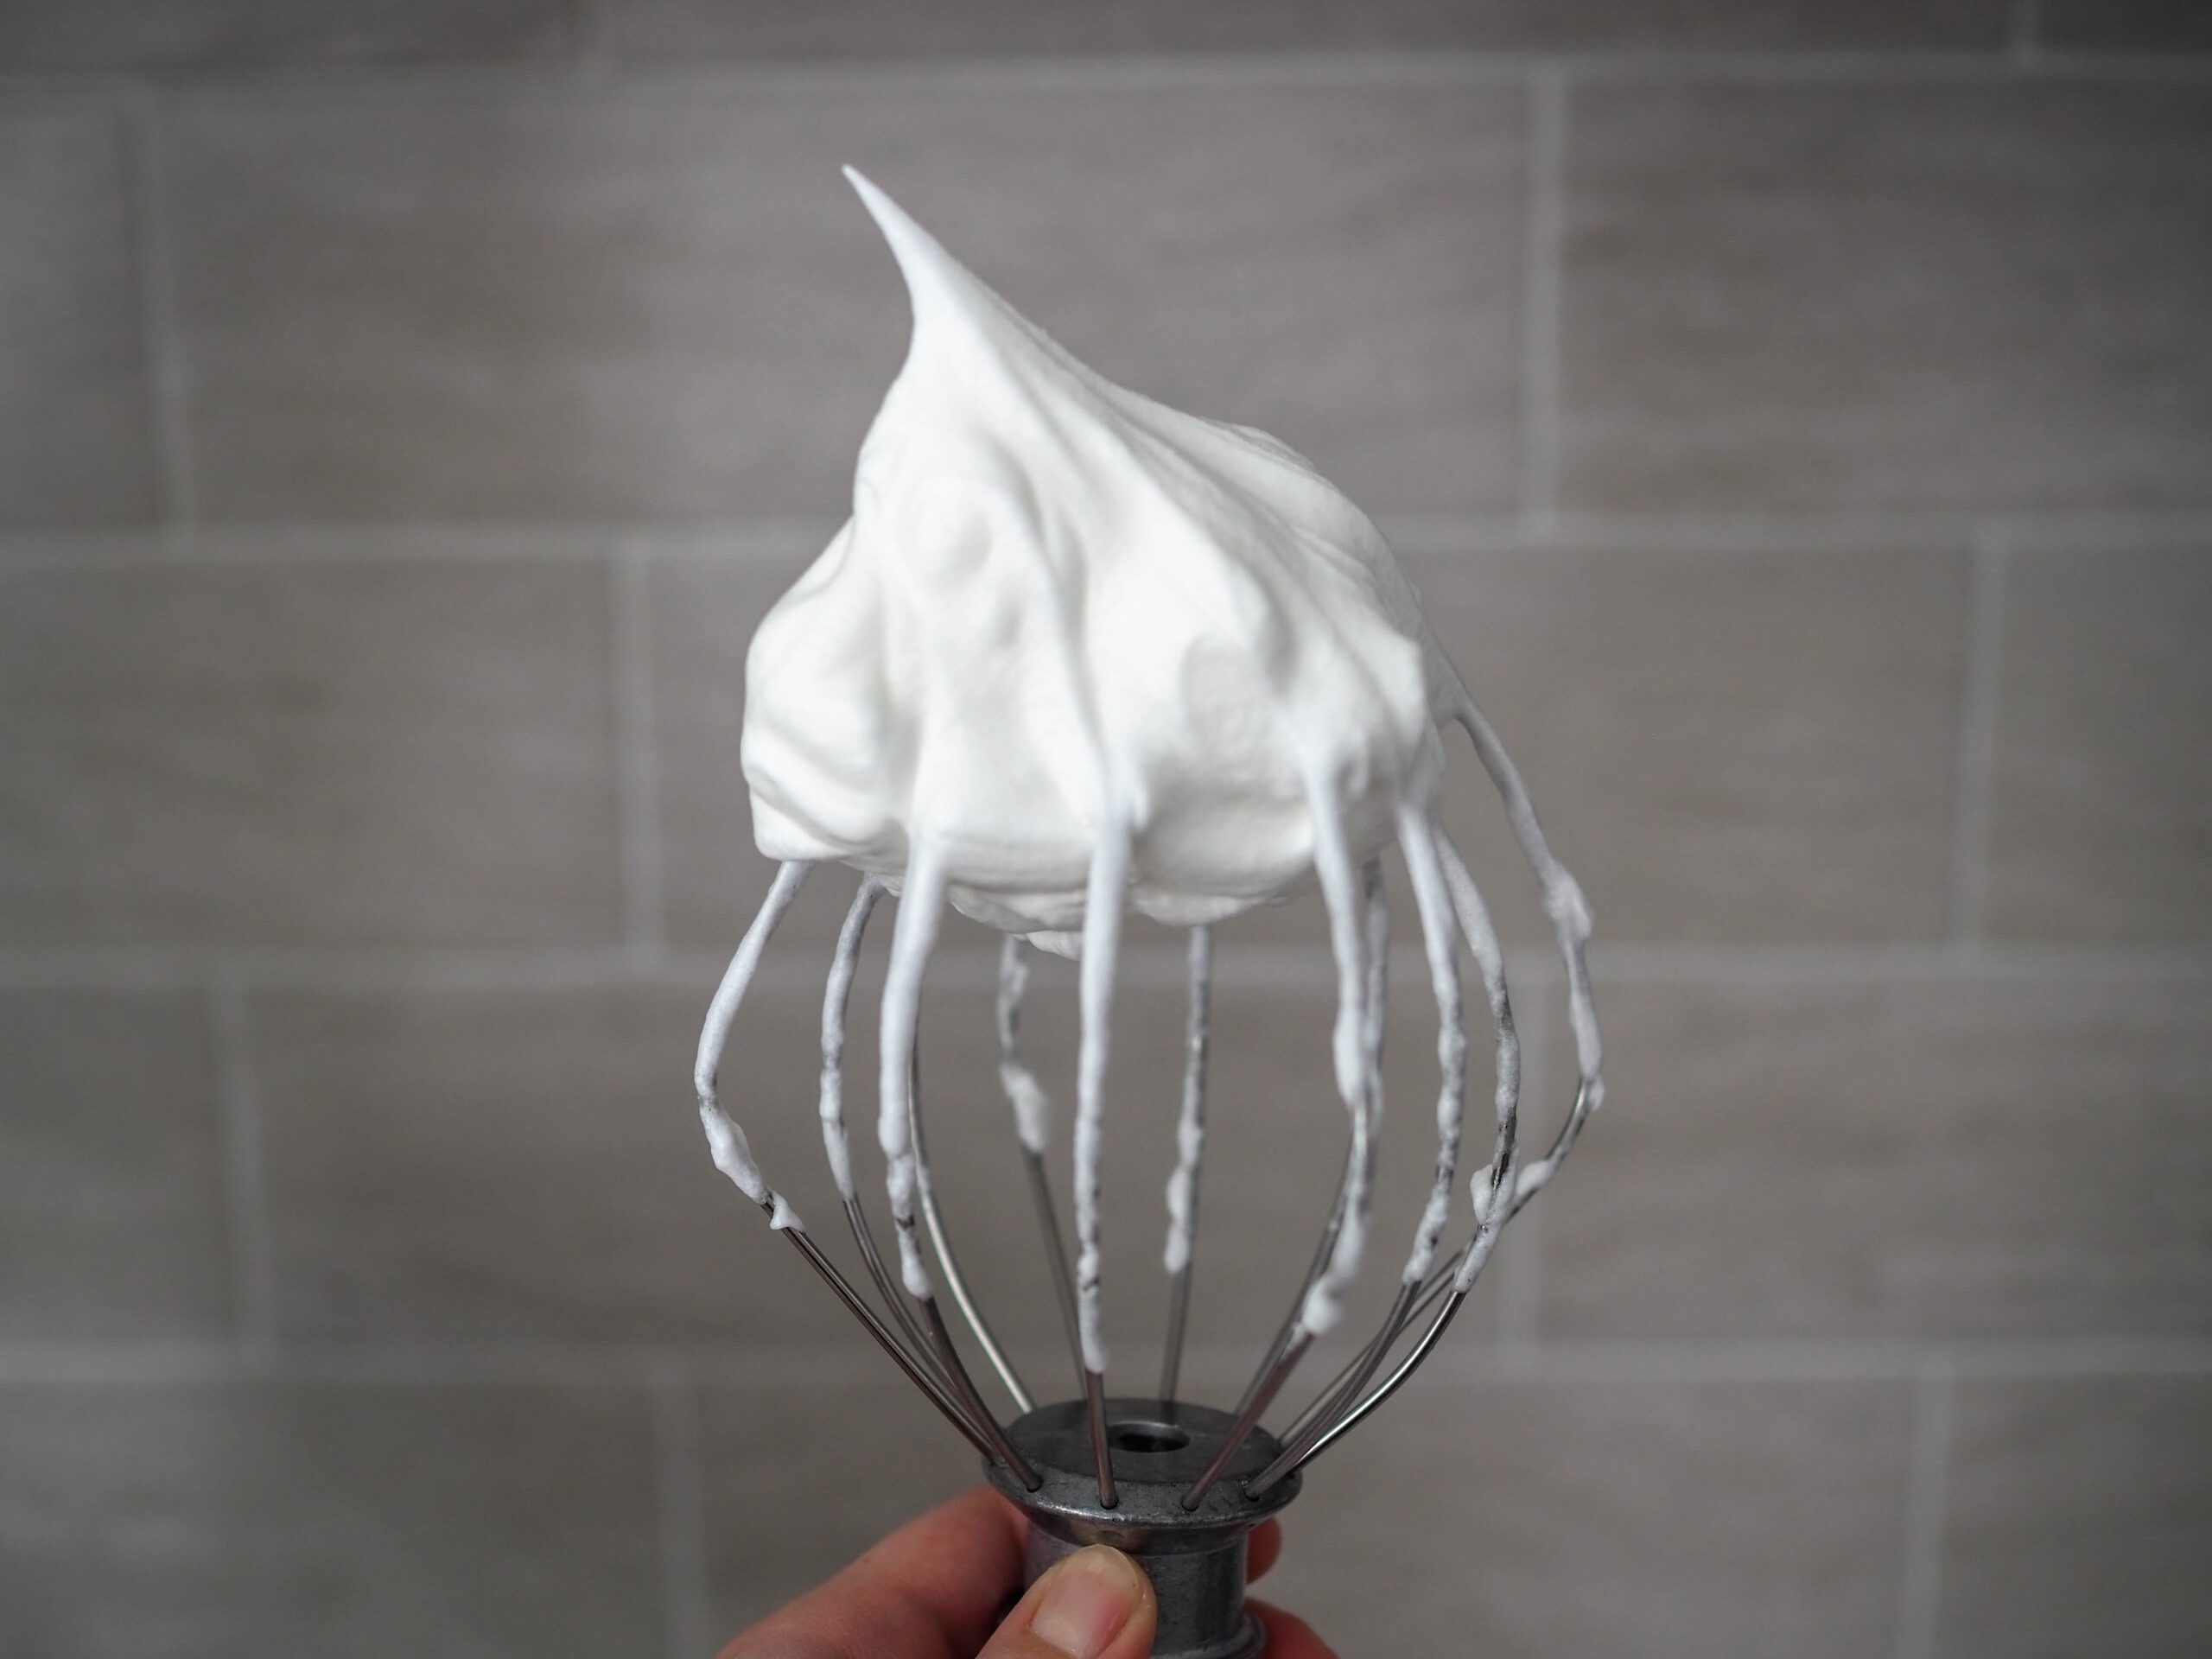 An upside down whisk attachment filled with meringue whipped to stiff peaks. The meringue has a sharp point, signifying it is properly whipped.